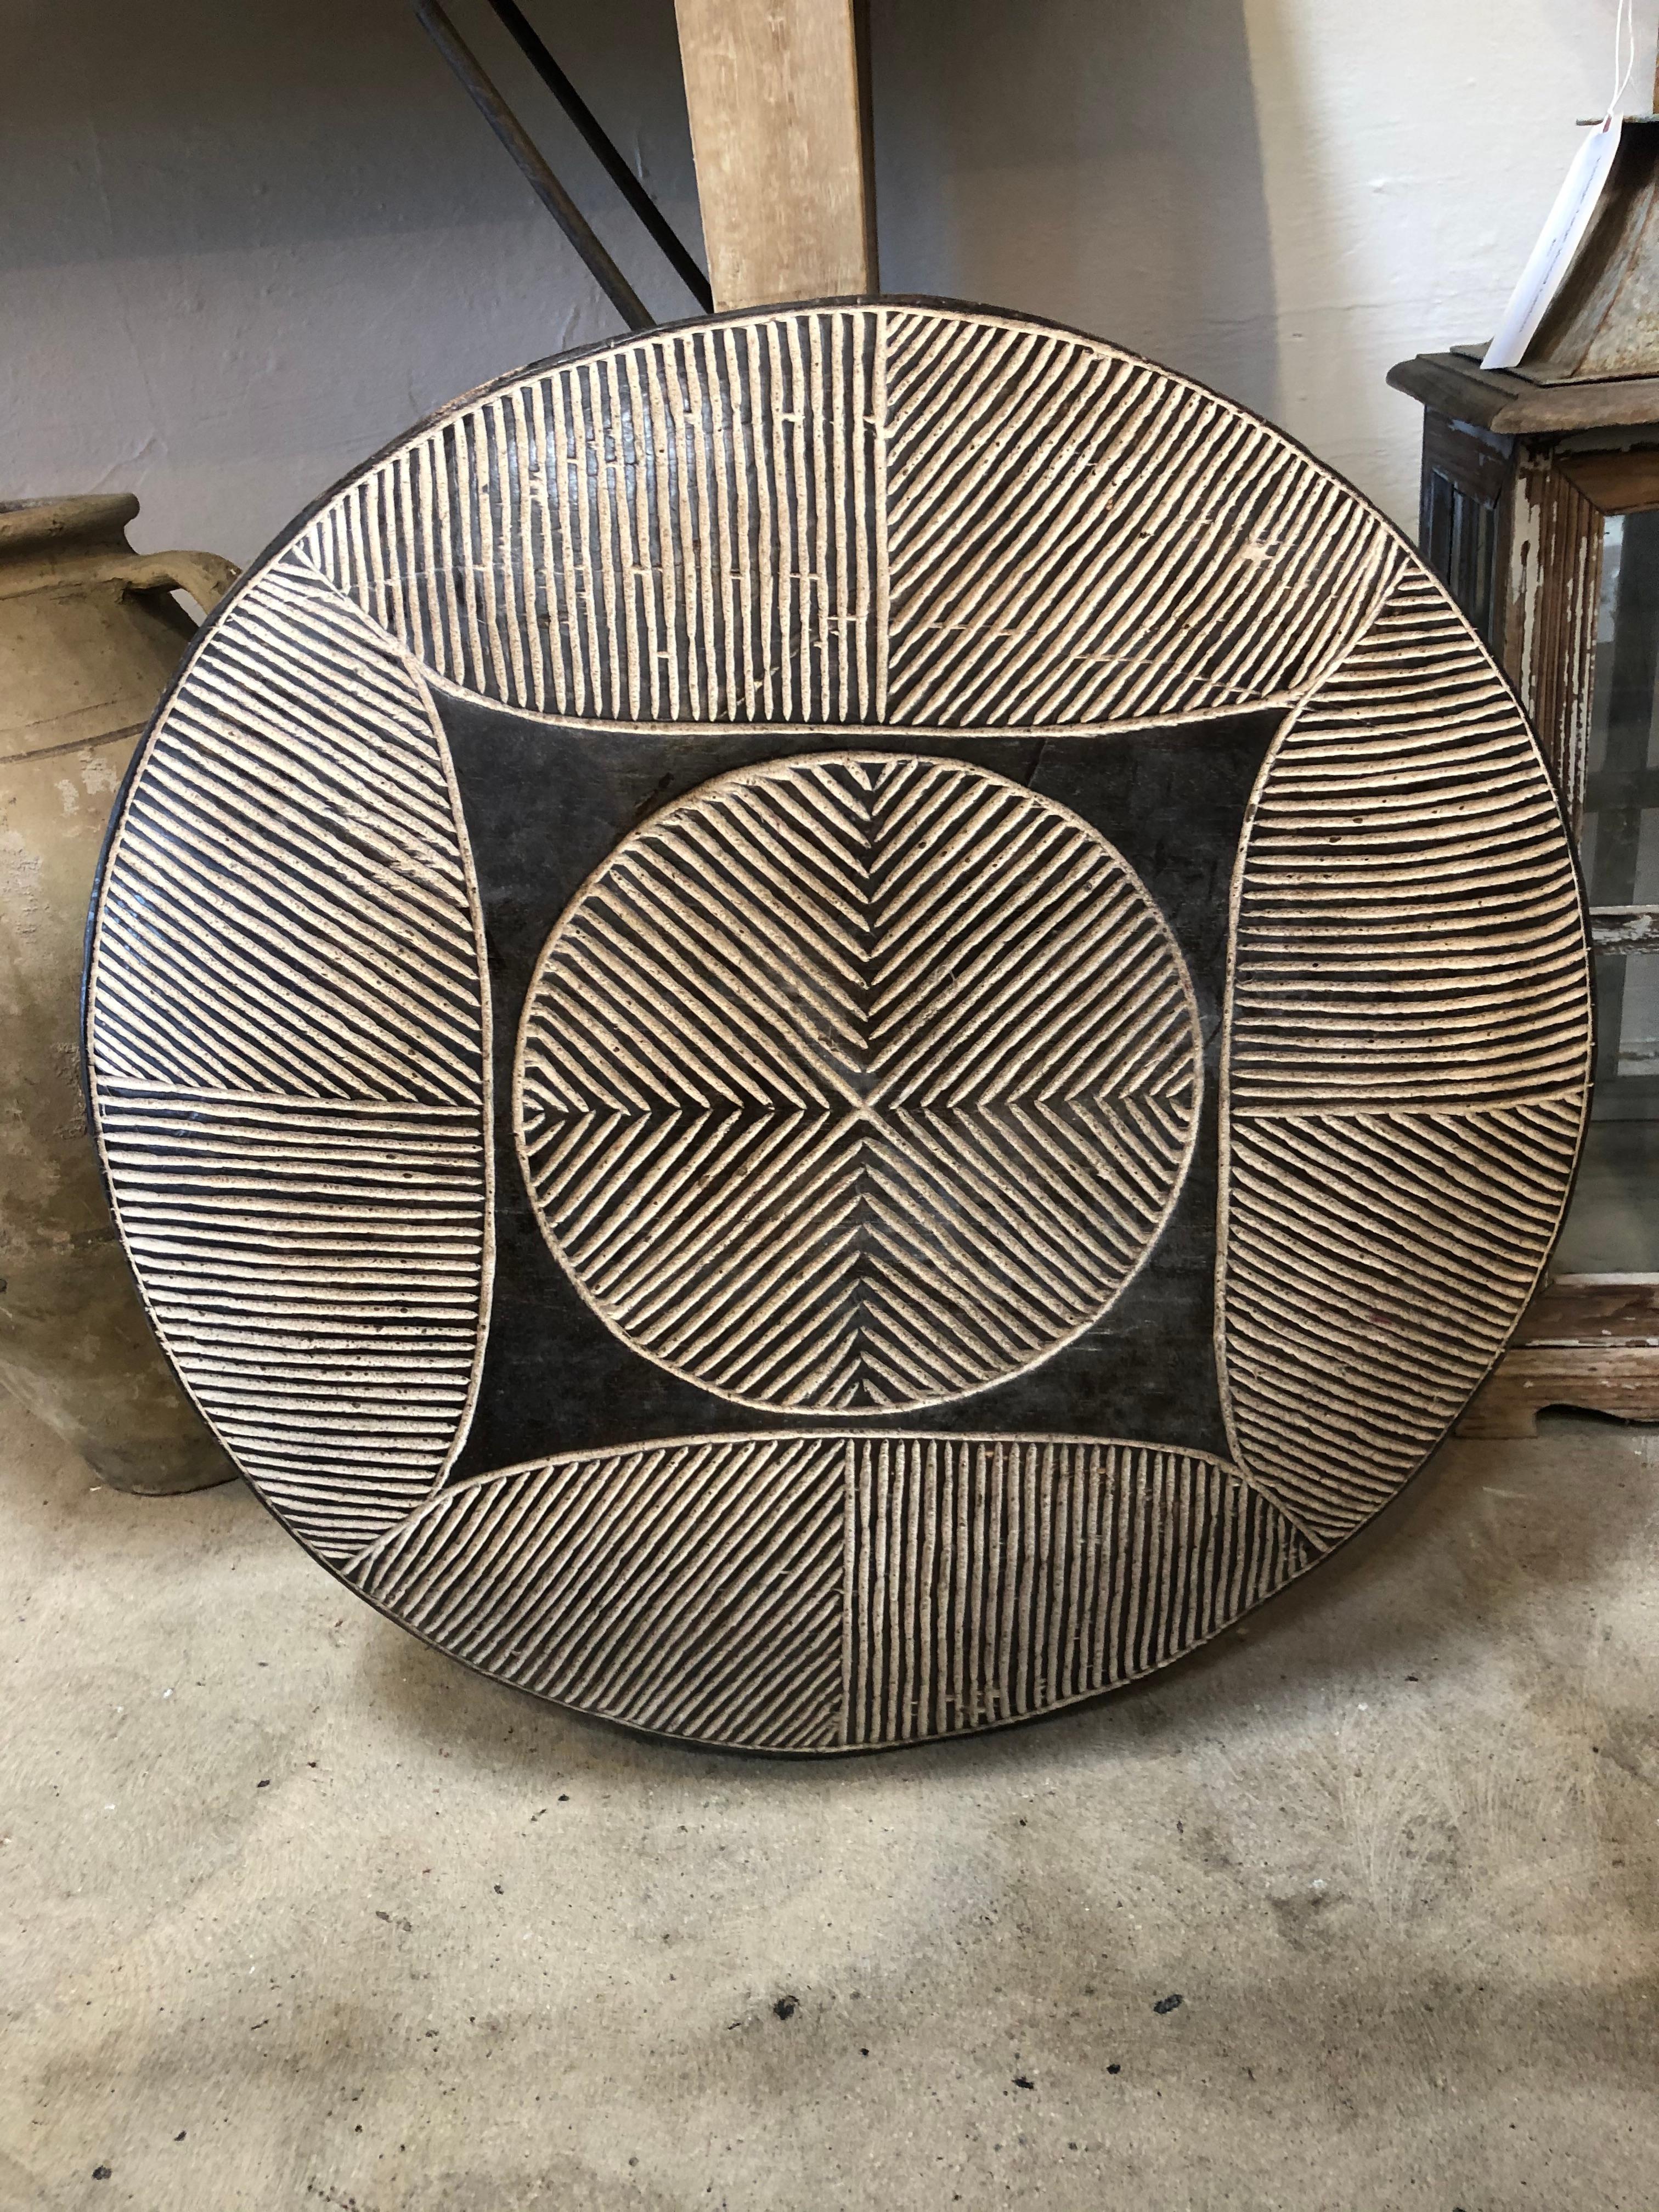 Hand carved African Warrior Shield from the early 20th century. These light-weight shields were used during combat, as opposed to heavier ones, to increase mobility. The geometric patterns featured on each individual shield also had rank and status